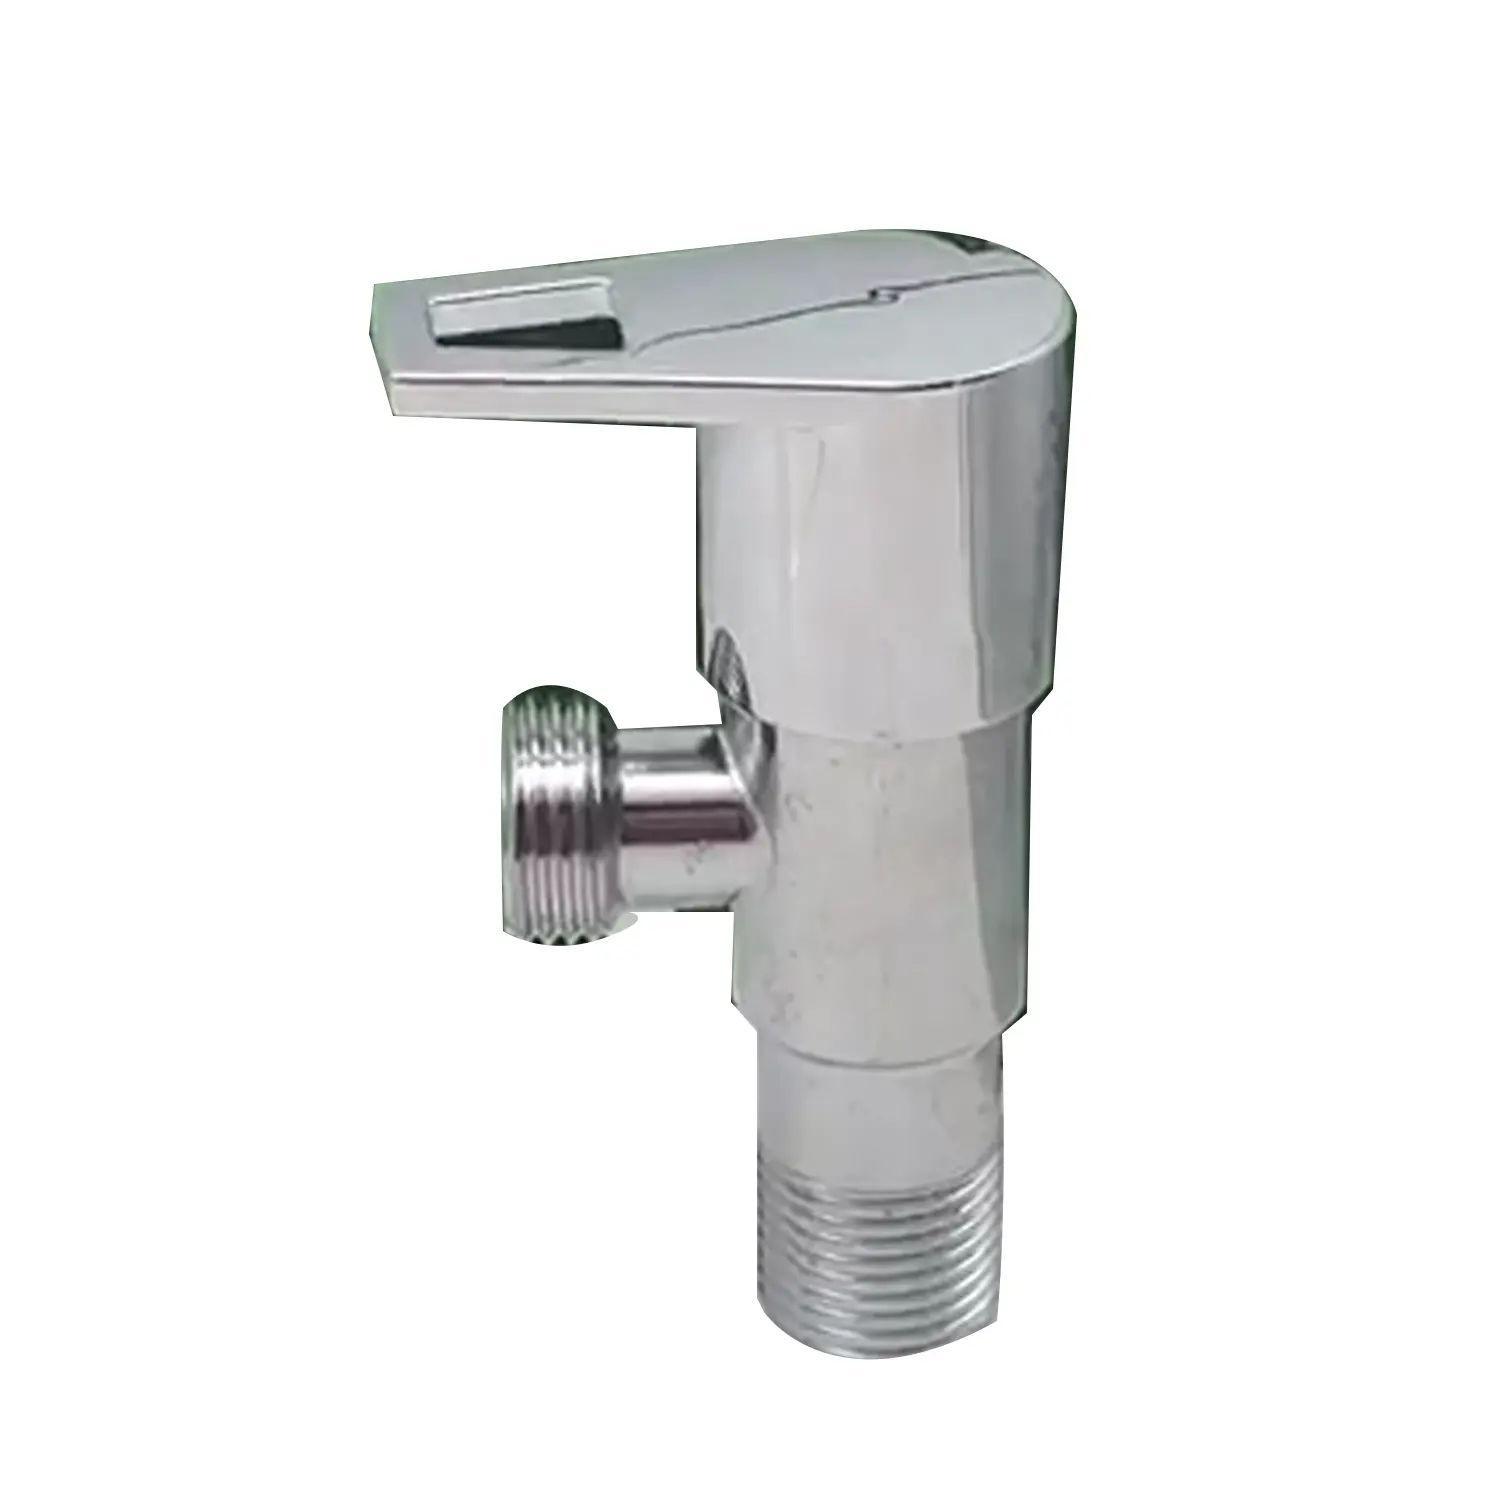 Angle stop cock valve brass chrome for bathroom for wash basin Connection